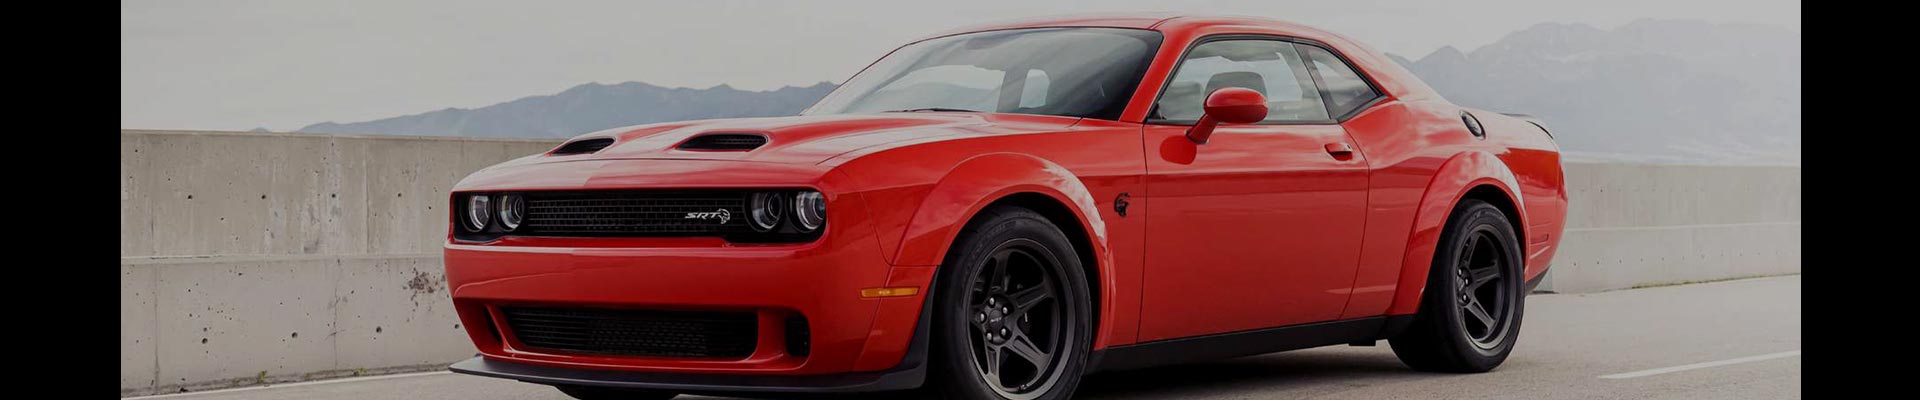 Shop Replacement and OEM 2010 Dodge Challenger Parts with Discounted Price on the Net